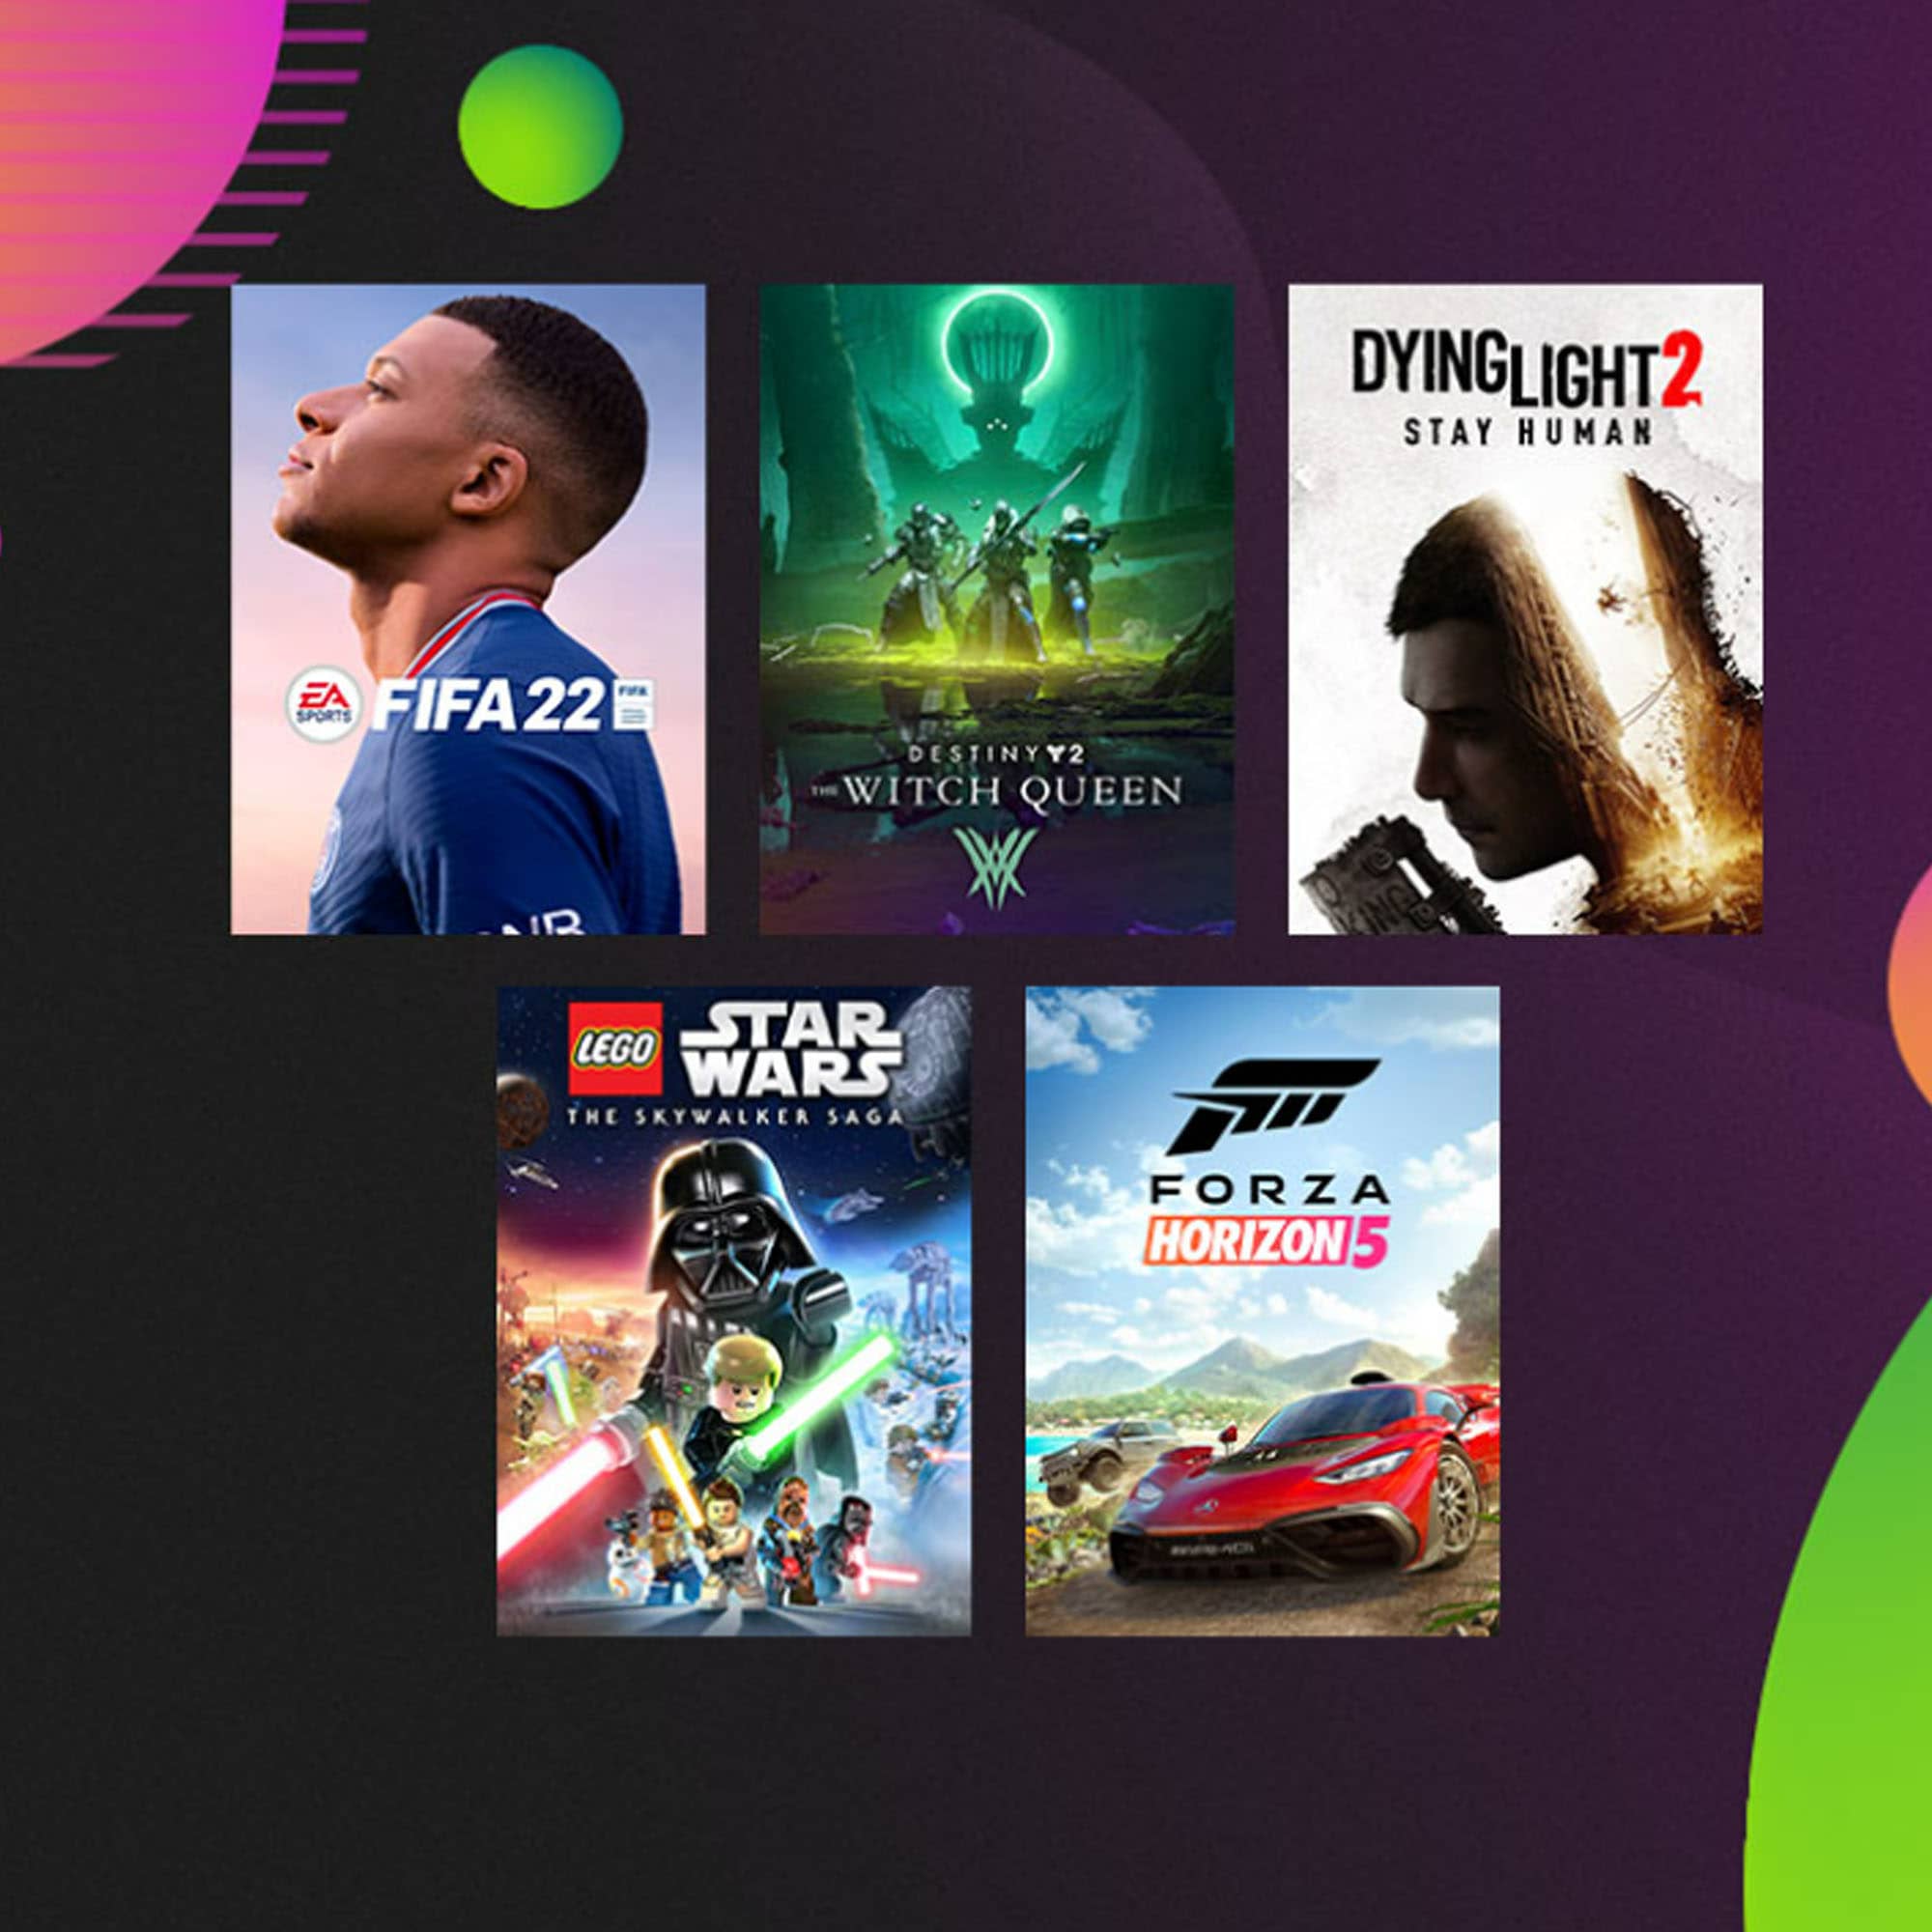 Cover art for FIFA 22, Destiny 2: The Witch Queen, Dying Light 2 Stay Human, LEGO Star Wars: The Skywalker Saga and Forza Horizon 5 from the Xbox Ultimate Game Sale.